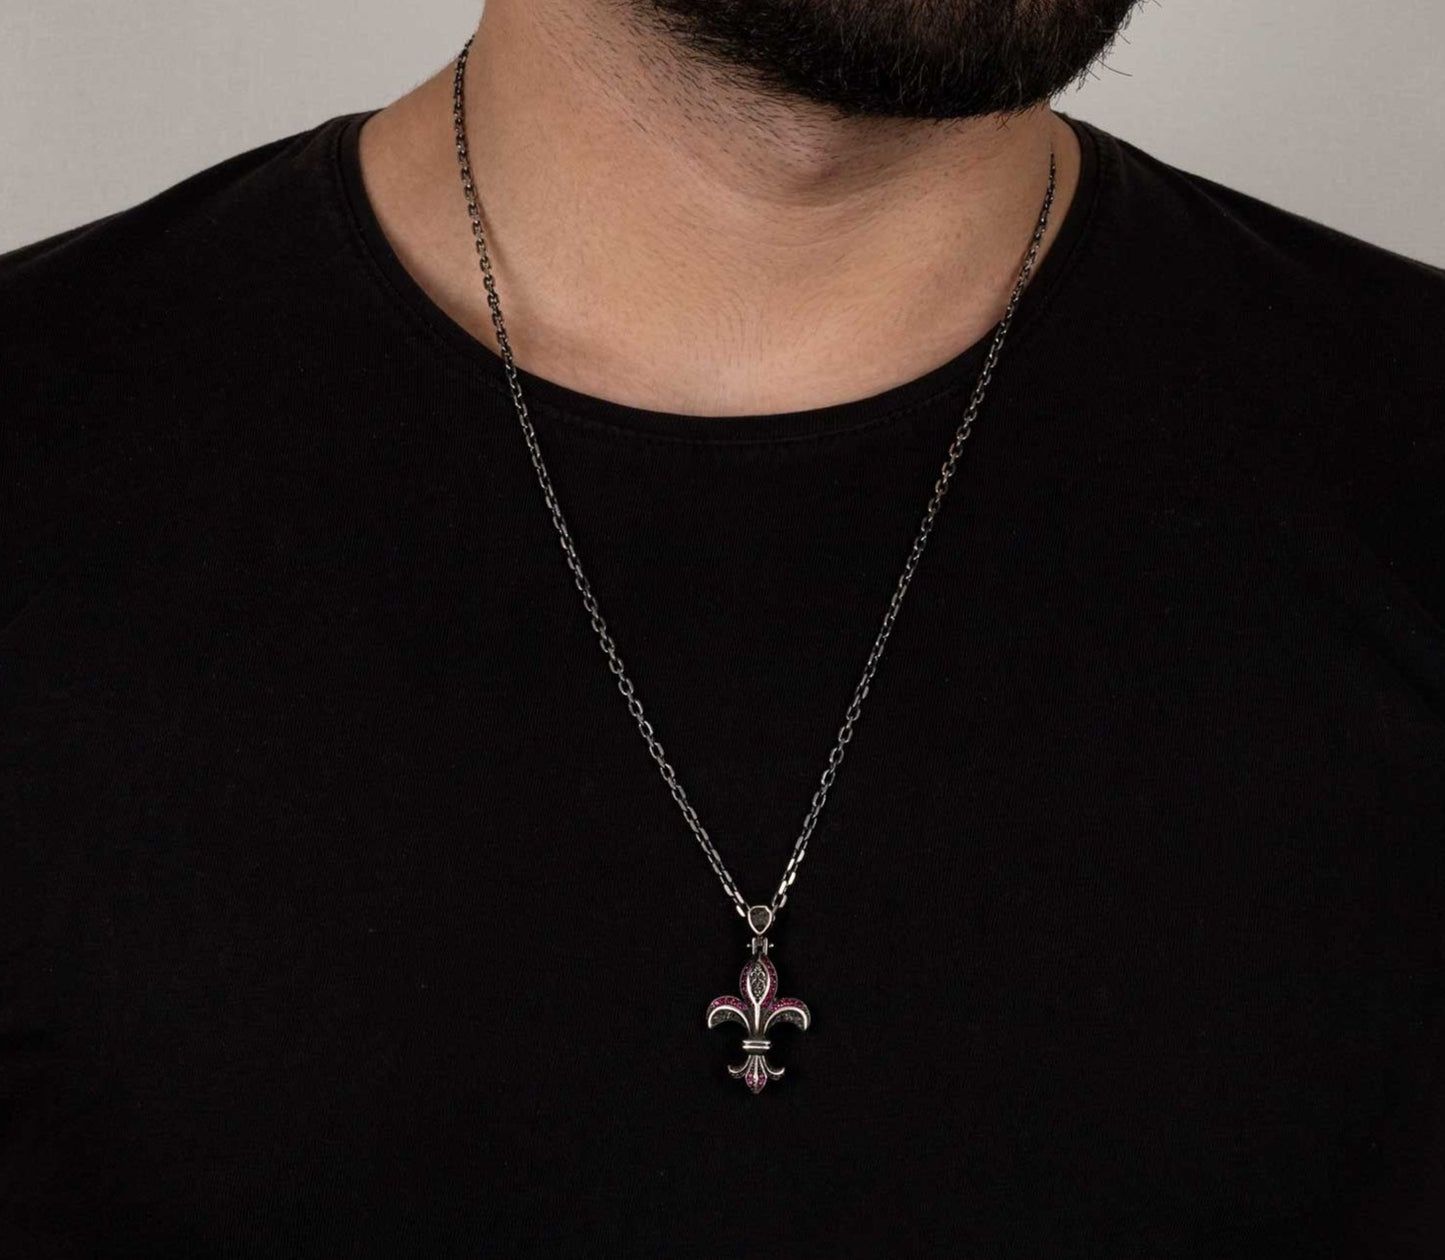 RARE PRINCE by CARAT SUTRA | Unique Designed Fleur-De-Lis Symbol Pendant Studded with Pink & Black Zircons for Men | 925 Sterling Silver Oxidized Pendant | Men's Jewelry | With Certificate of Authenticity and 925 Hallmark - caratsutra